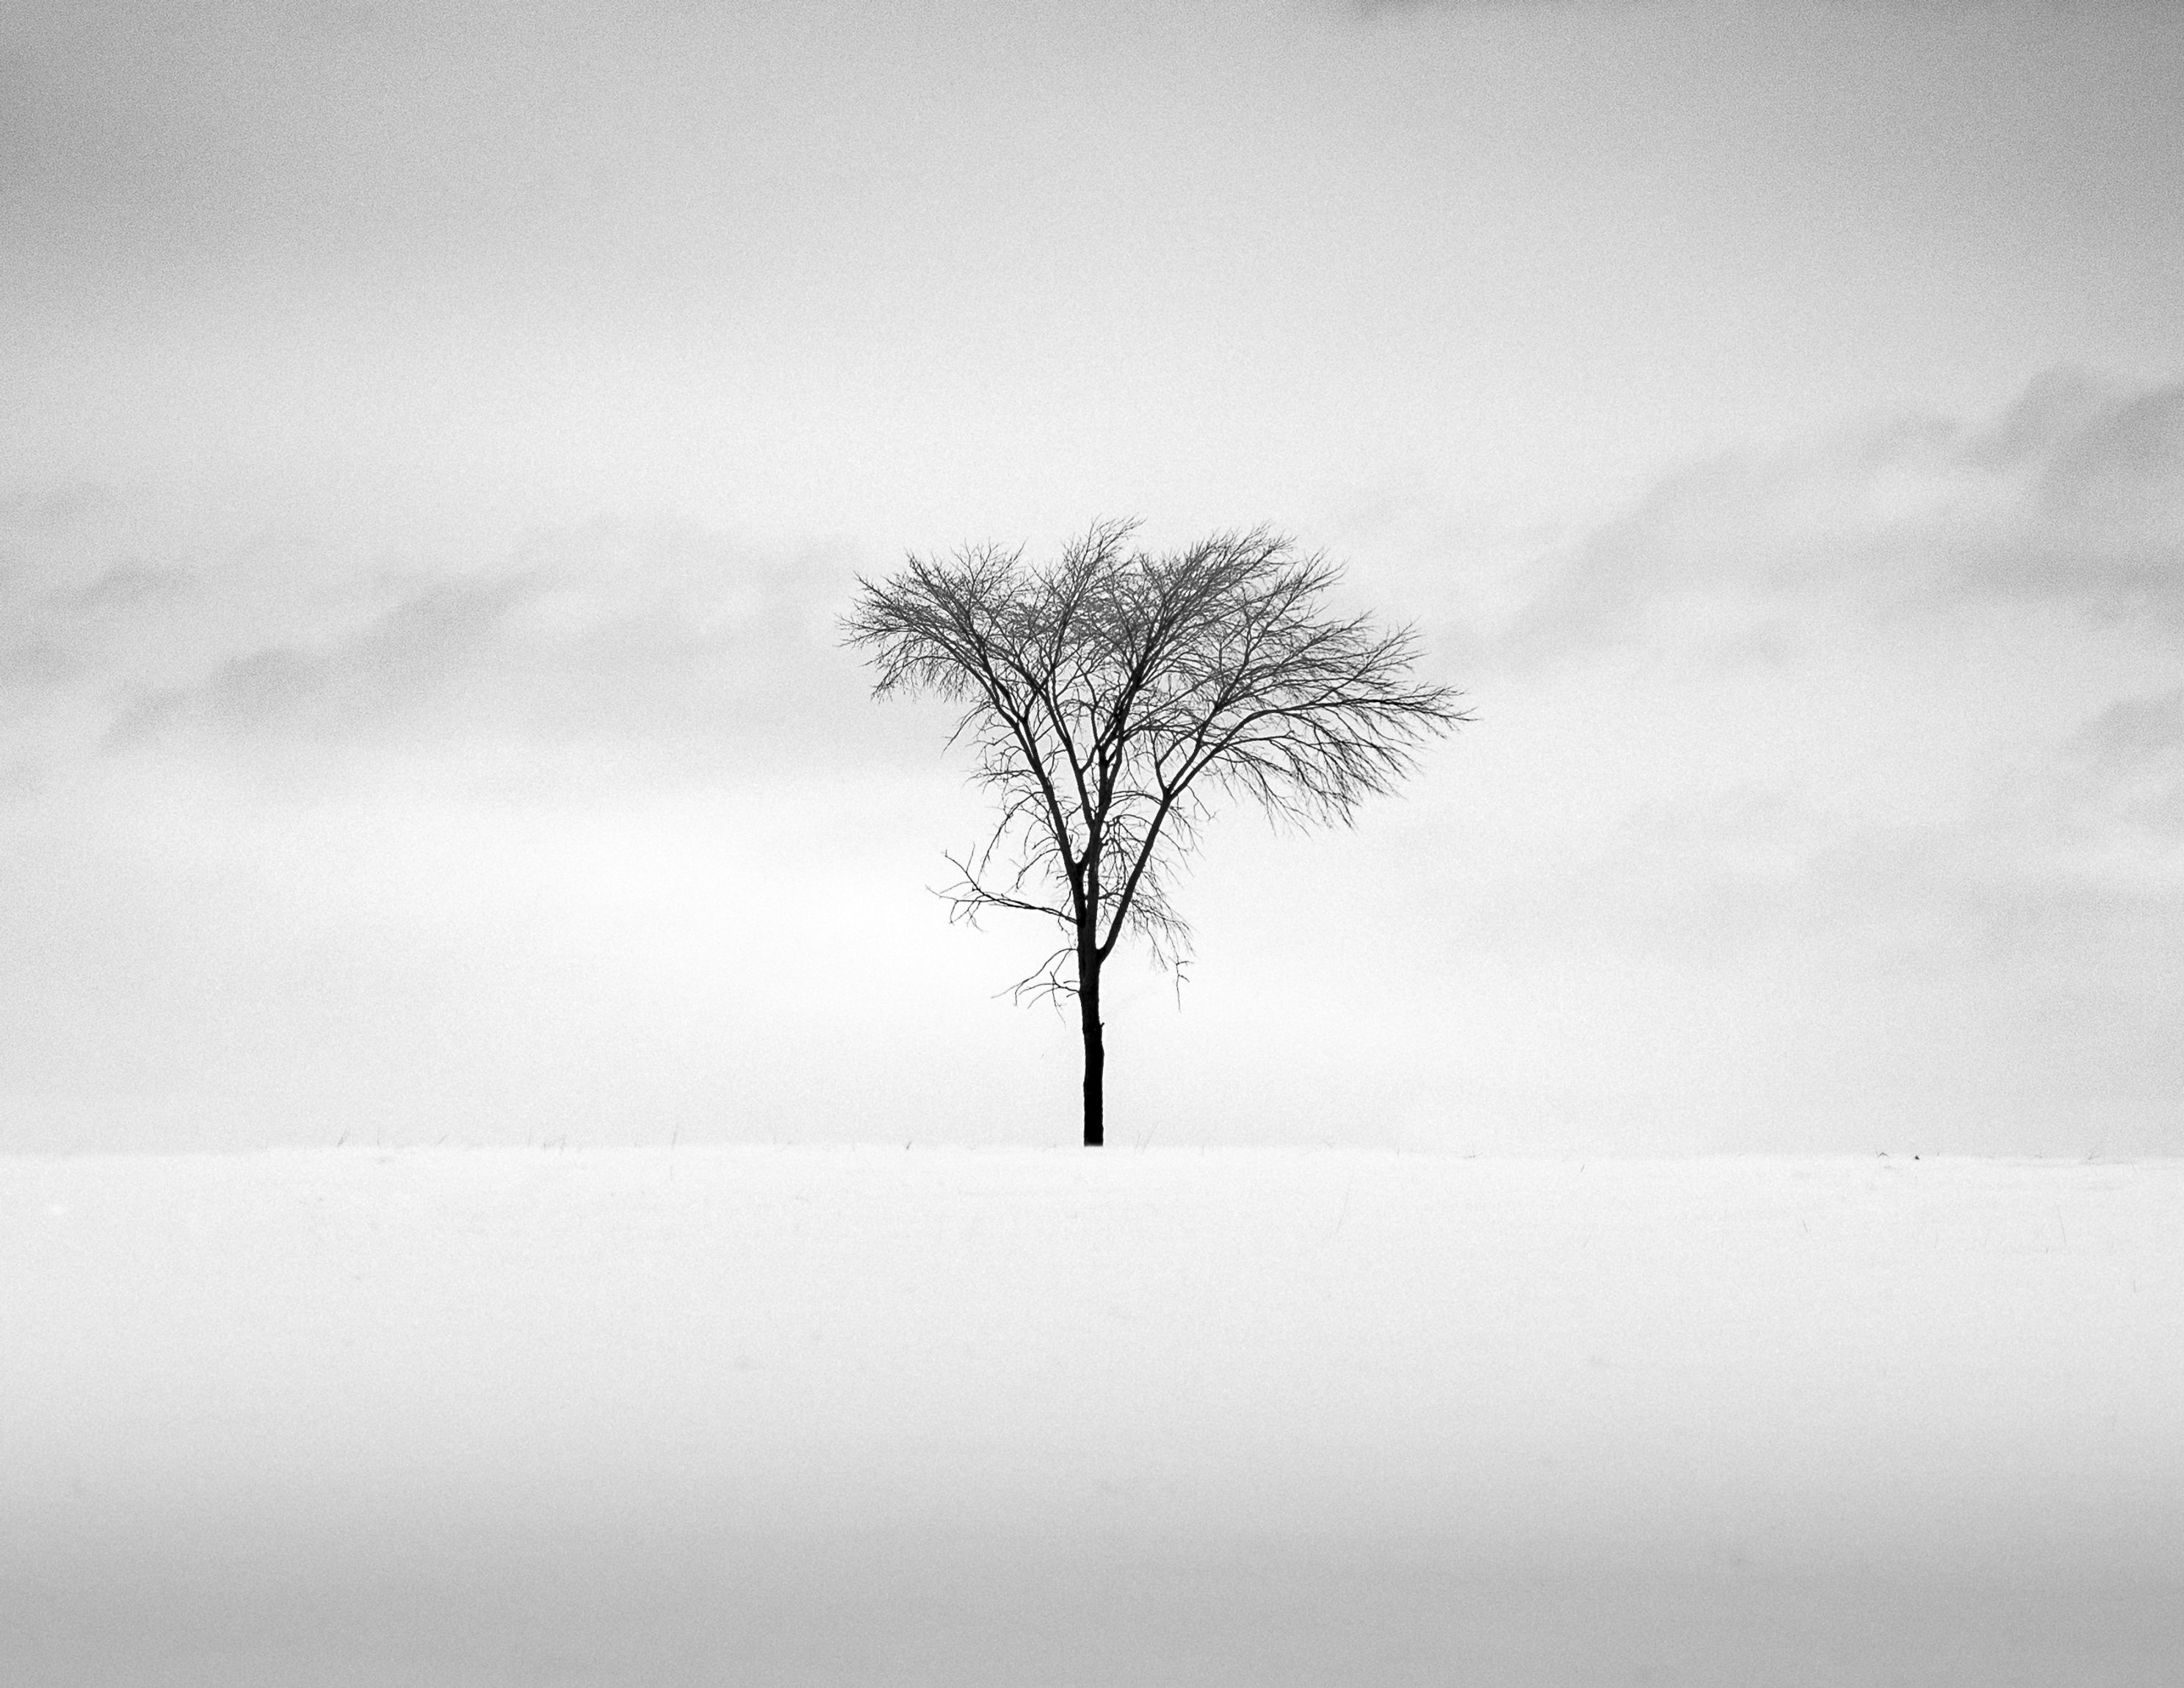 A single tree in a snow-covered field